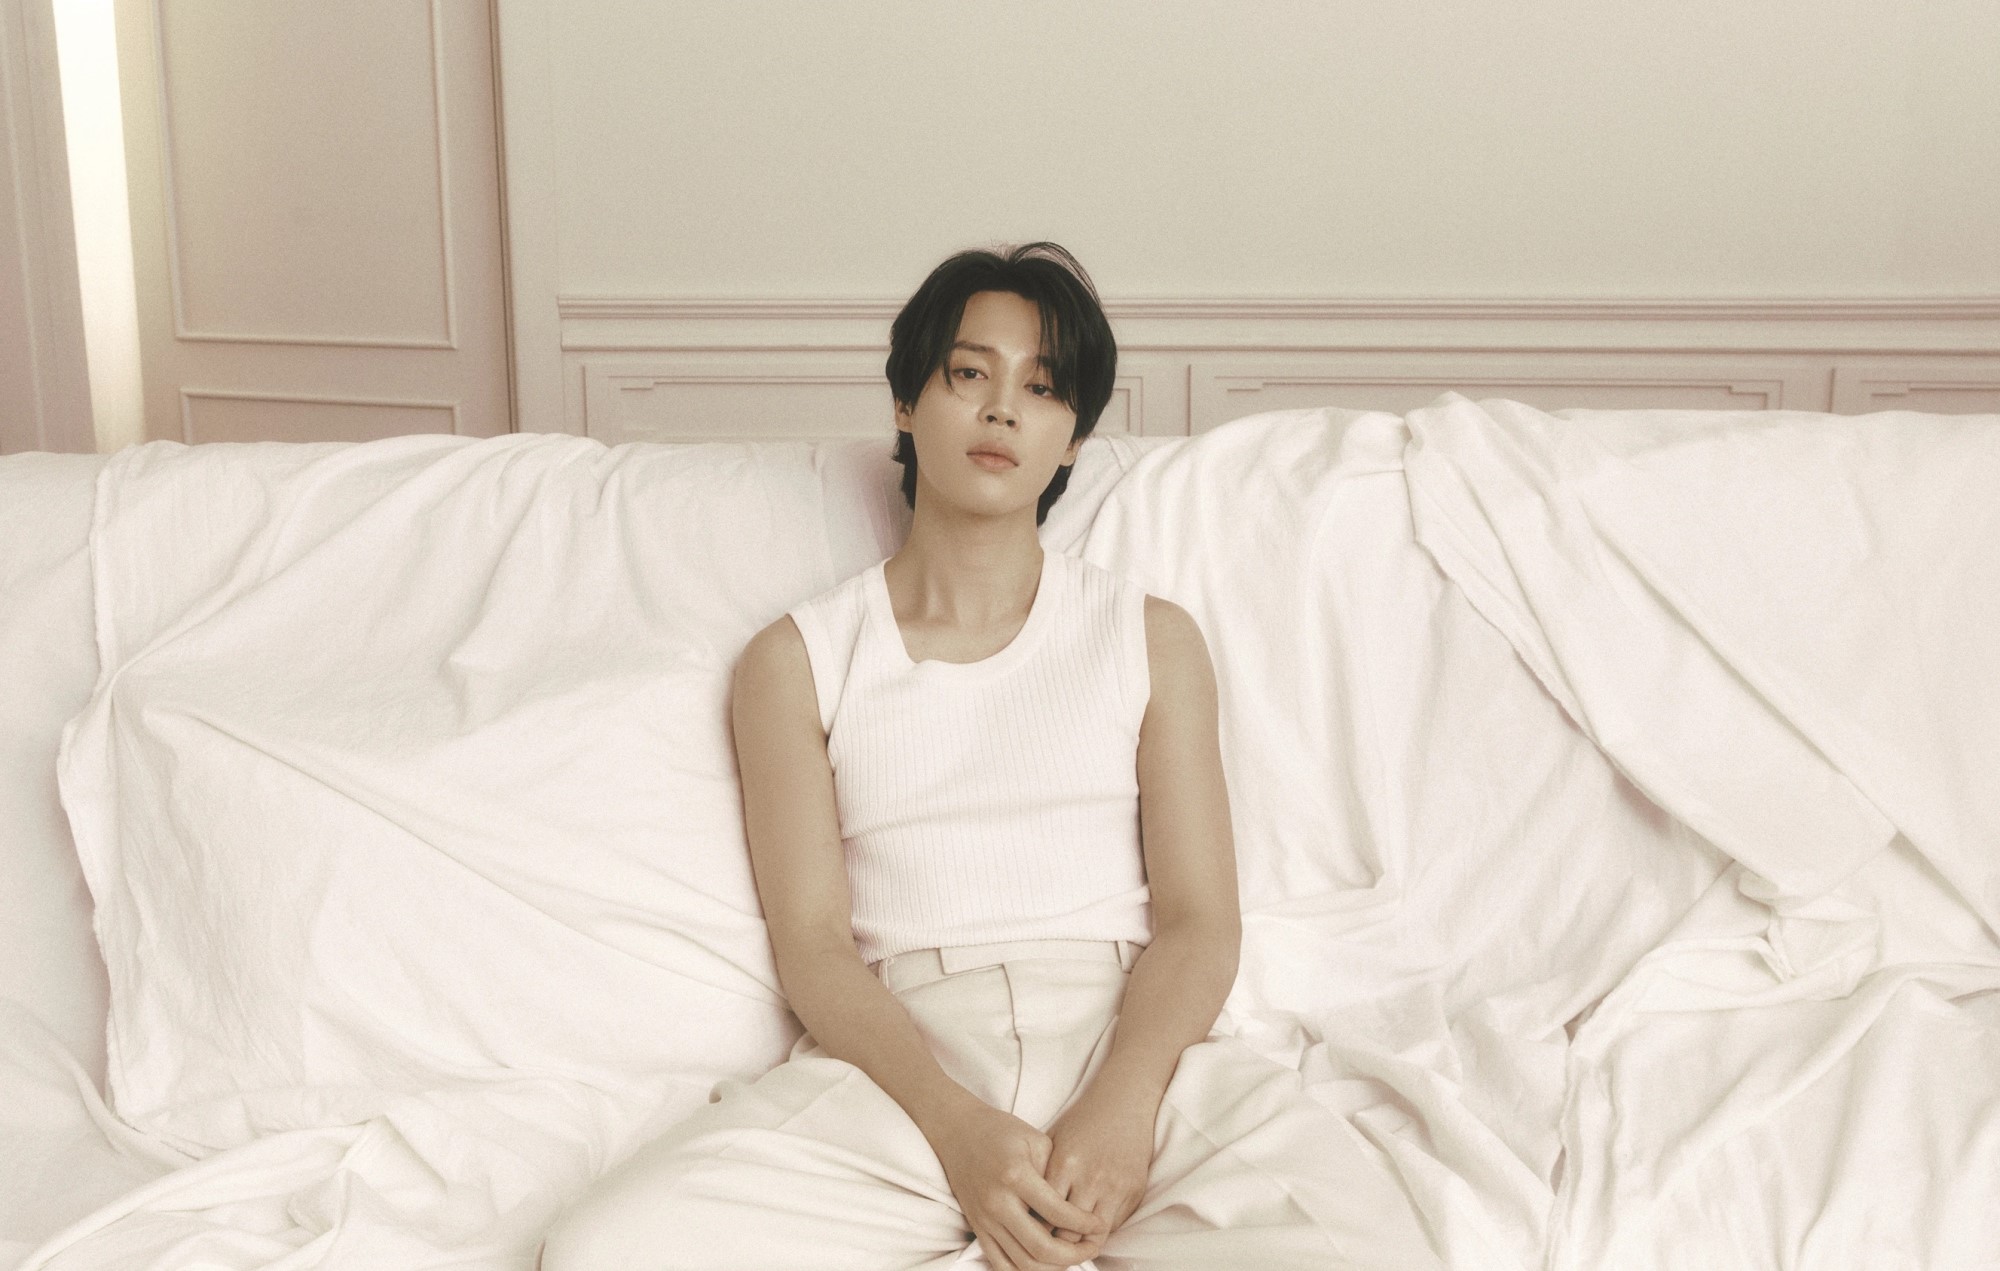 Jimin – ’FACE’ review: BTS singer captures the turbulence of modern life in shadowy debut solo album